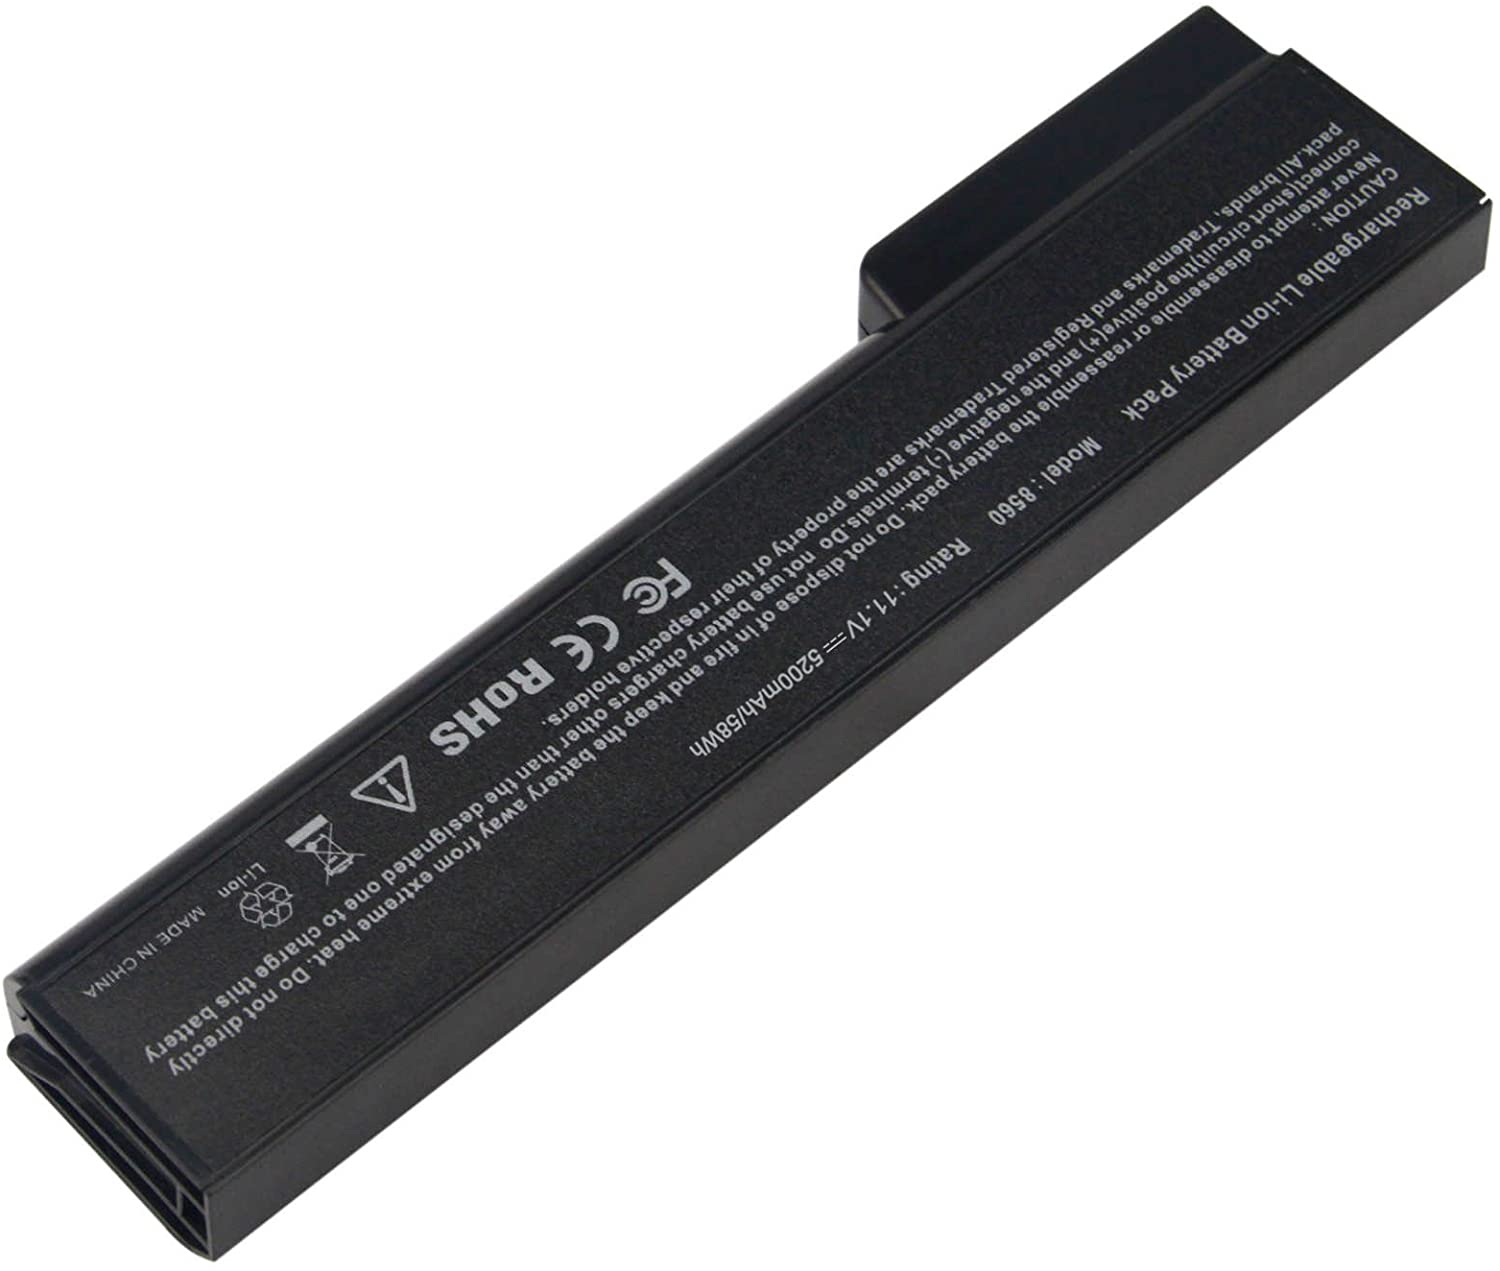 10.8V 55Wh 6 Cell CC06XL Laptop Battery compatible with HP EliteBook 8460p 8460w 8560p ProBook 6360b 6460b 6560b